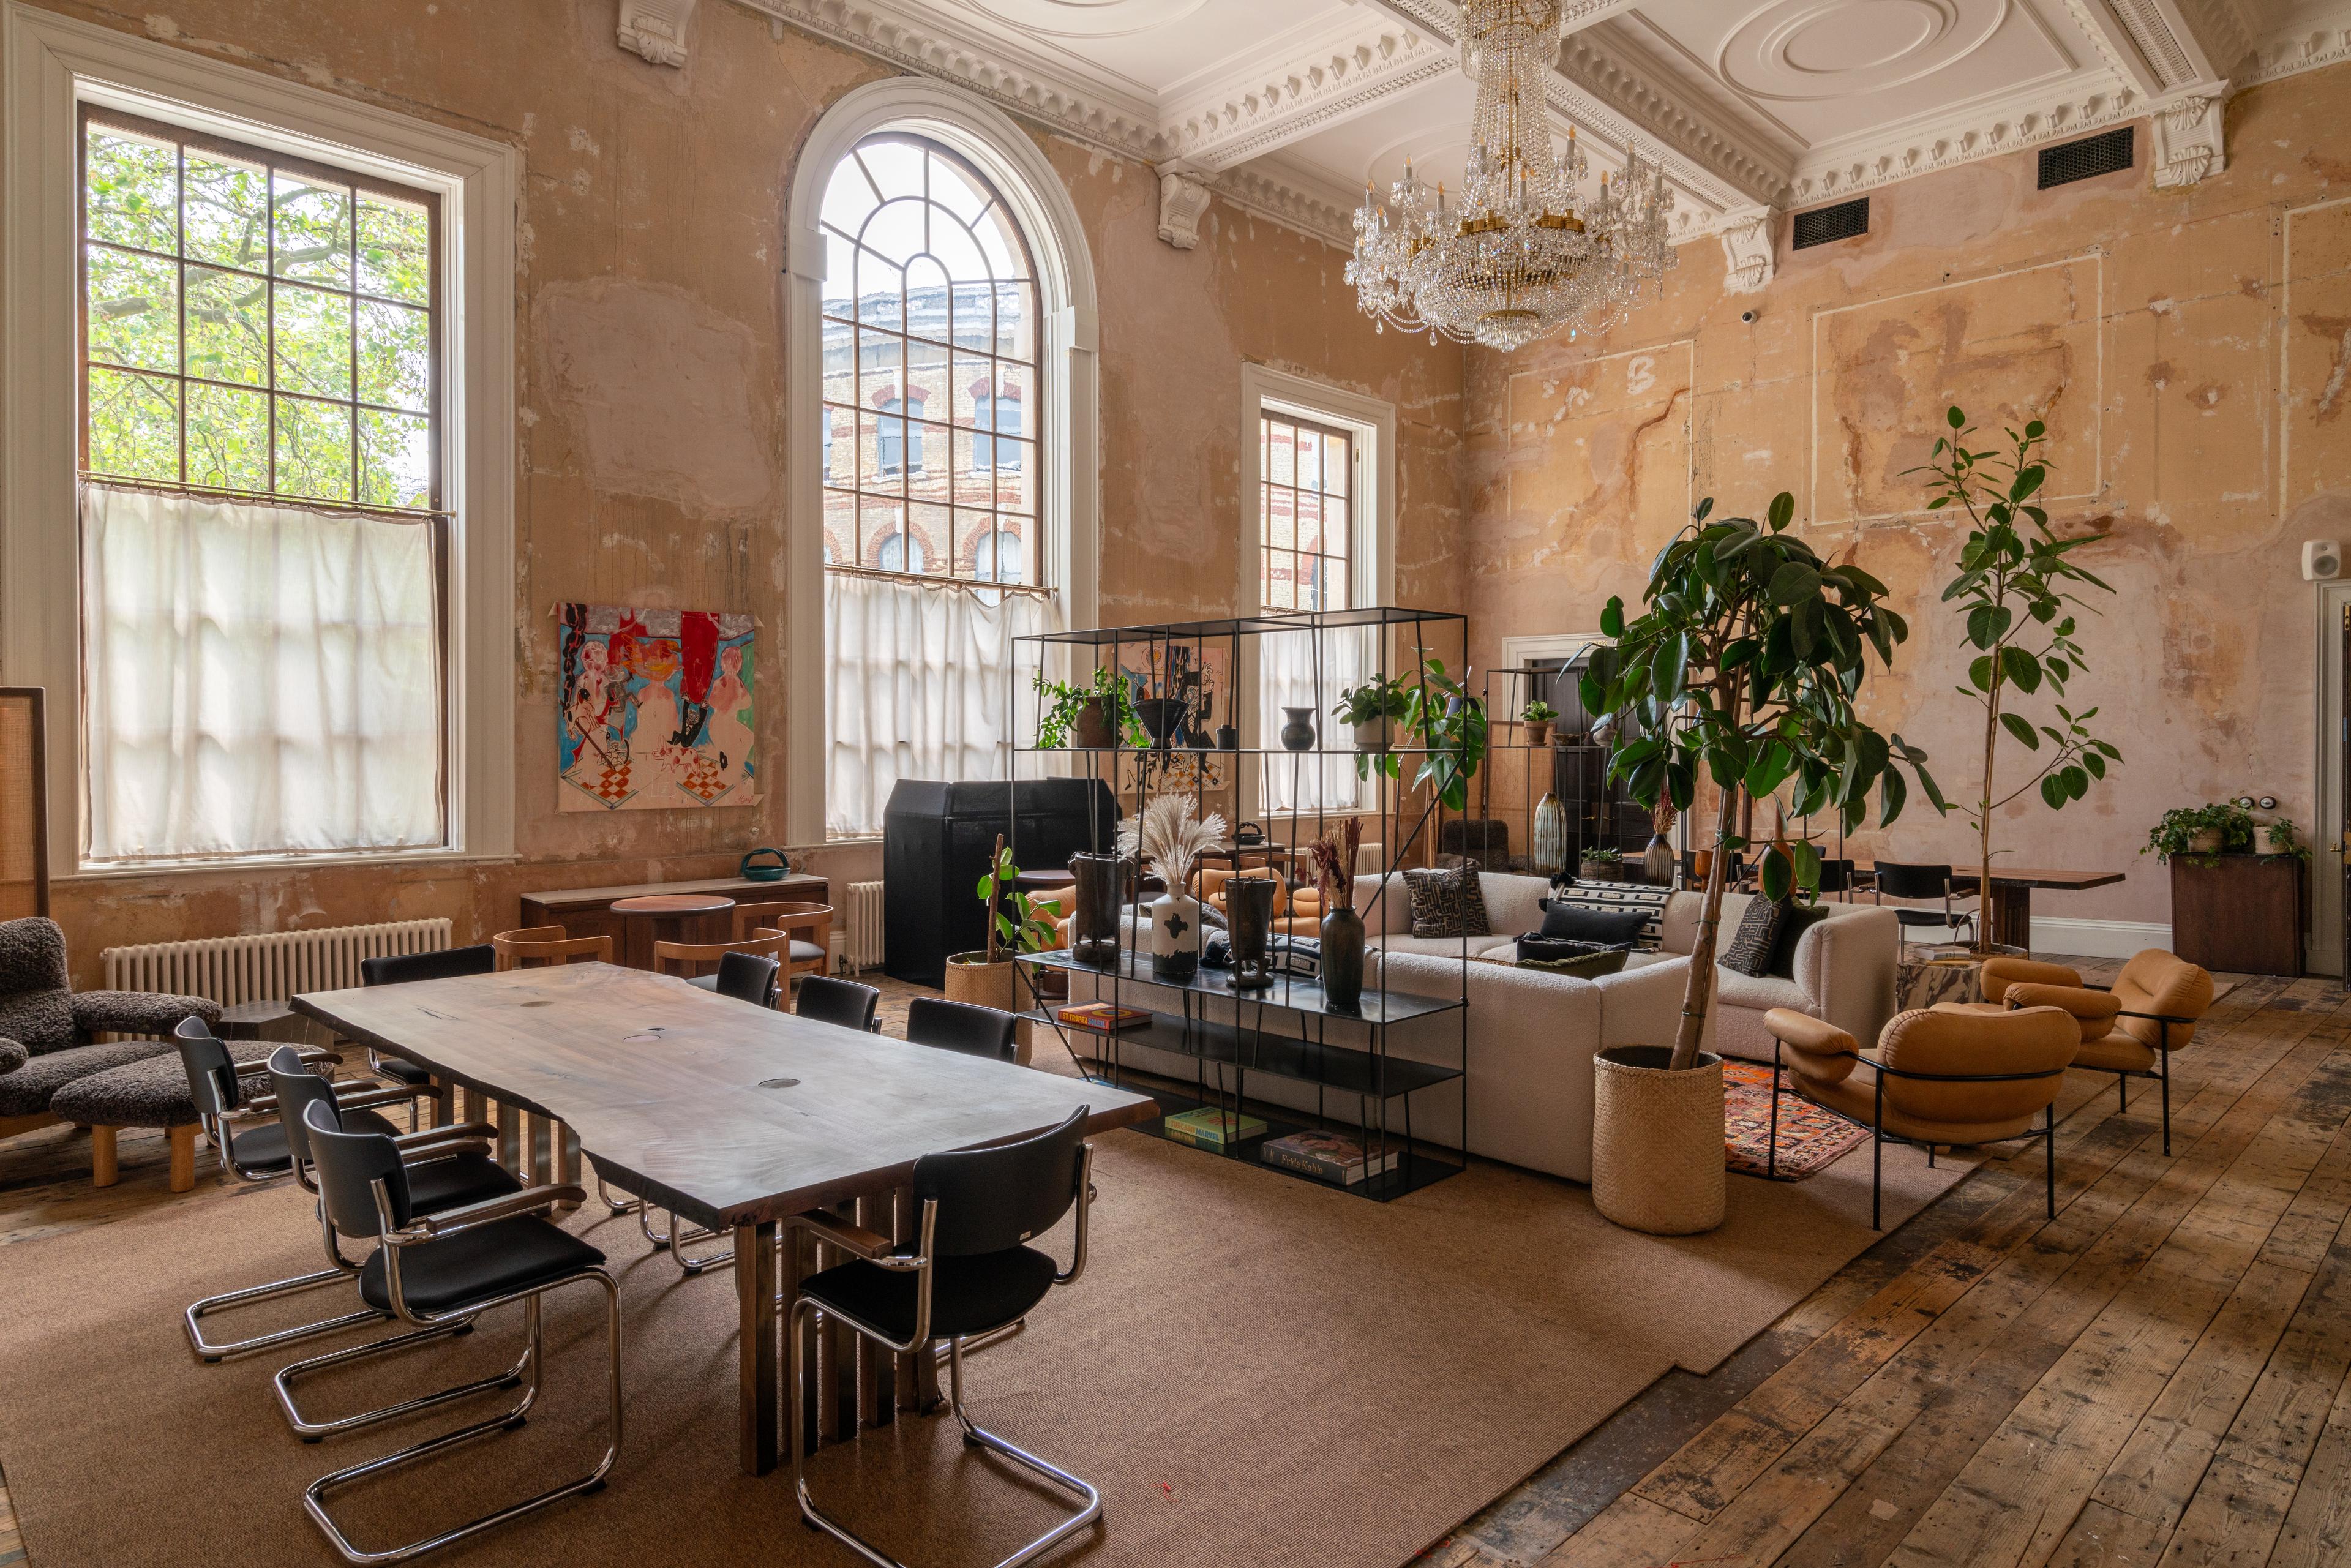 Knotel At Old Sessions House, The Great Room photo #3